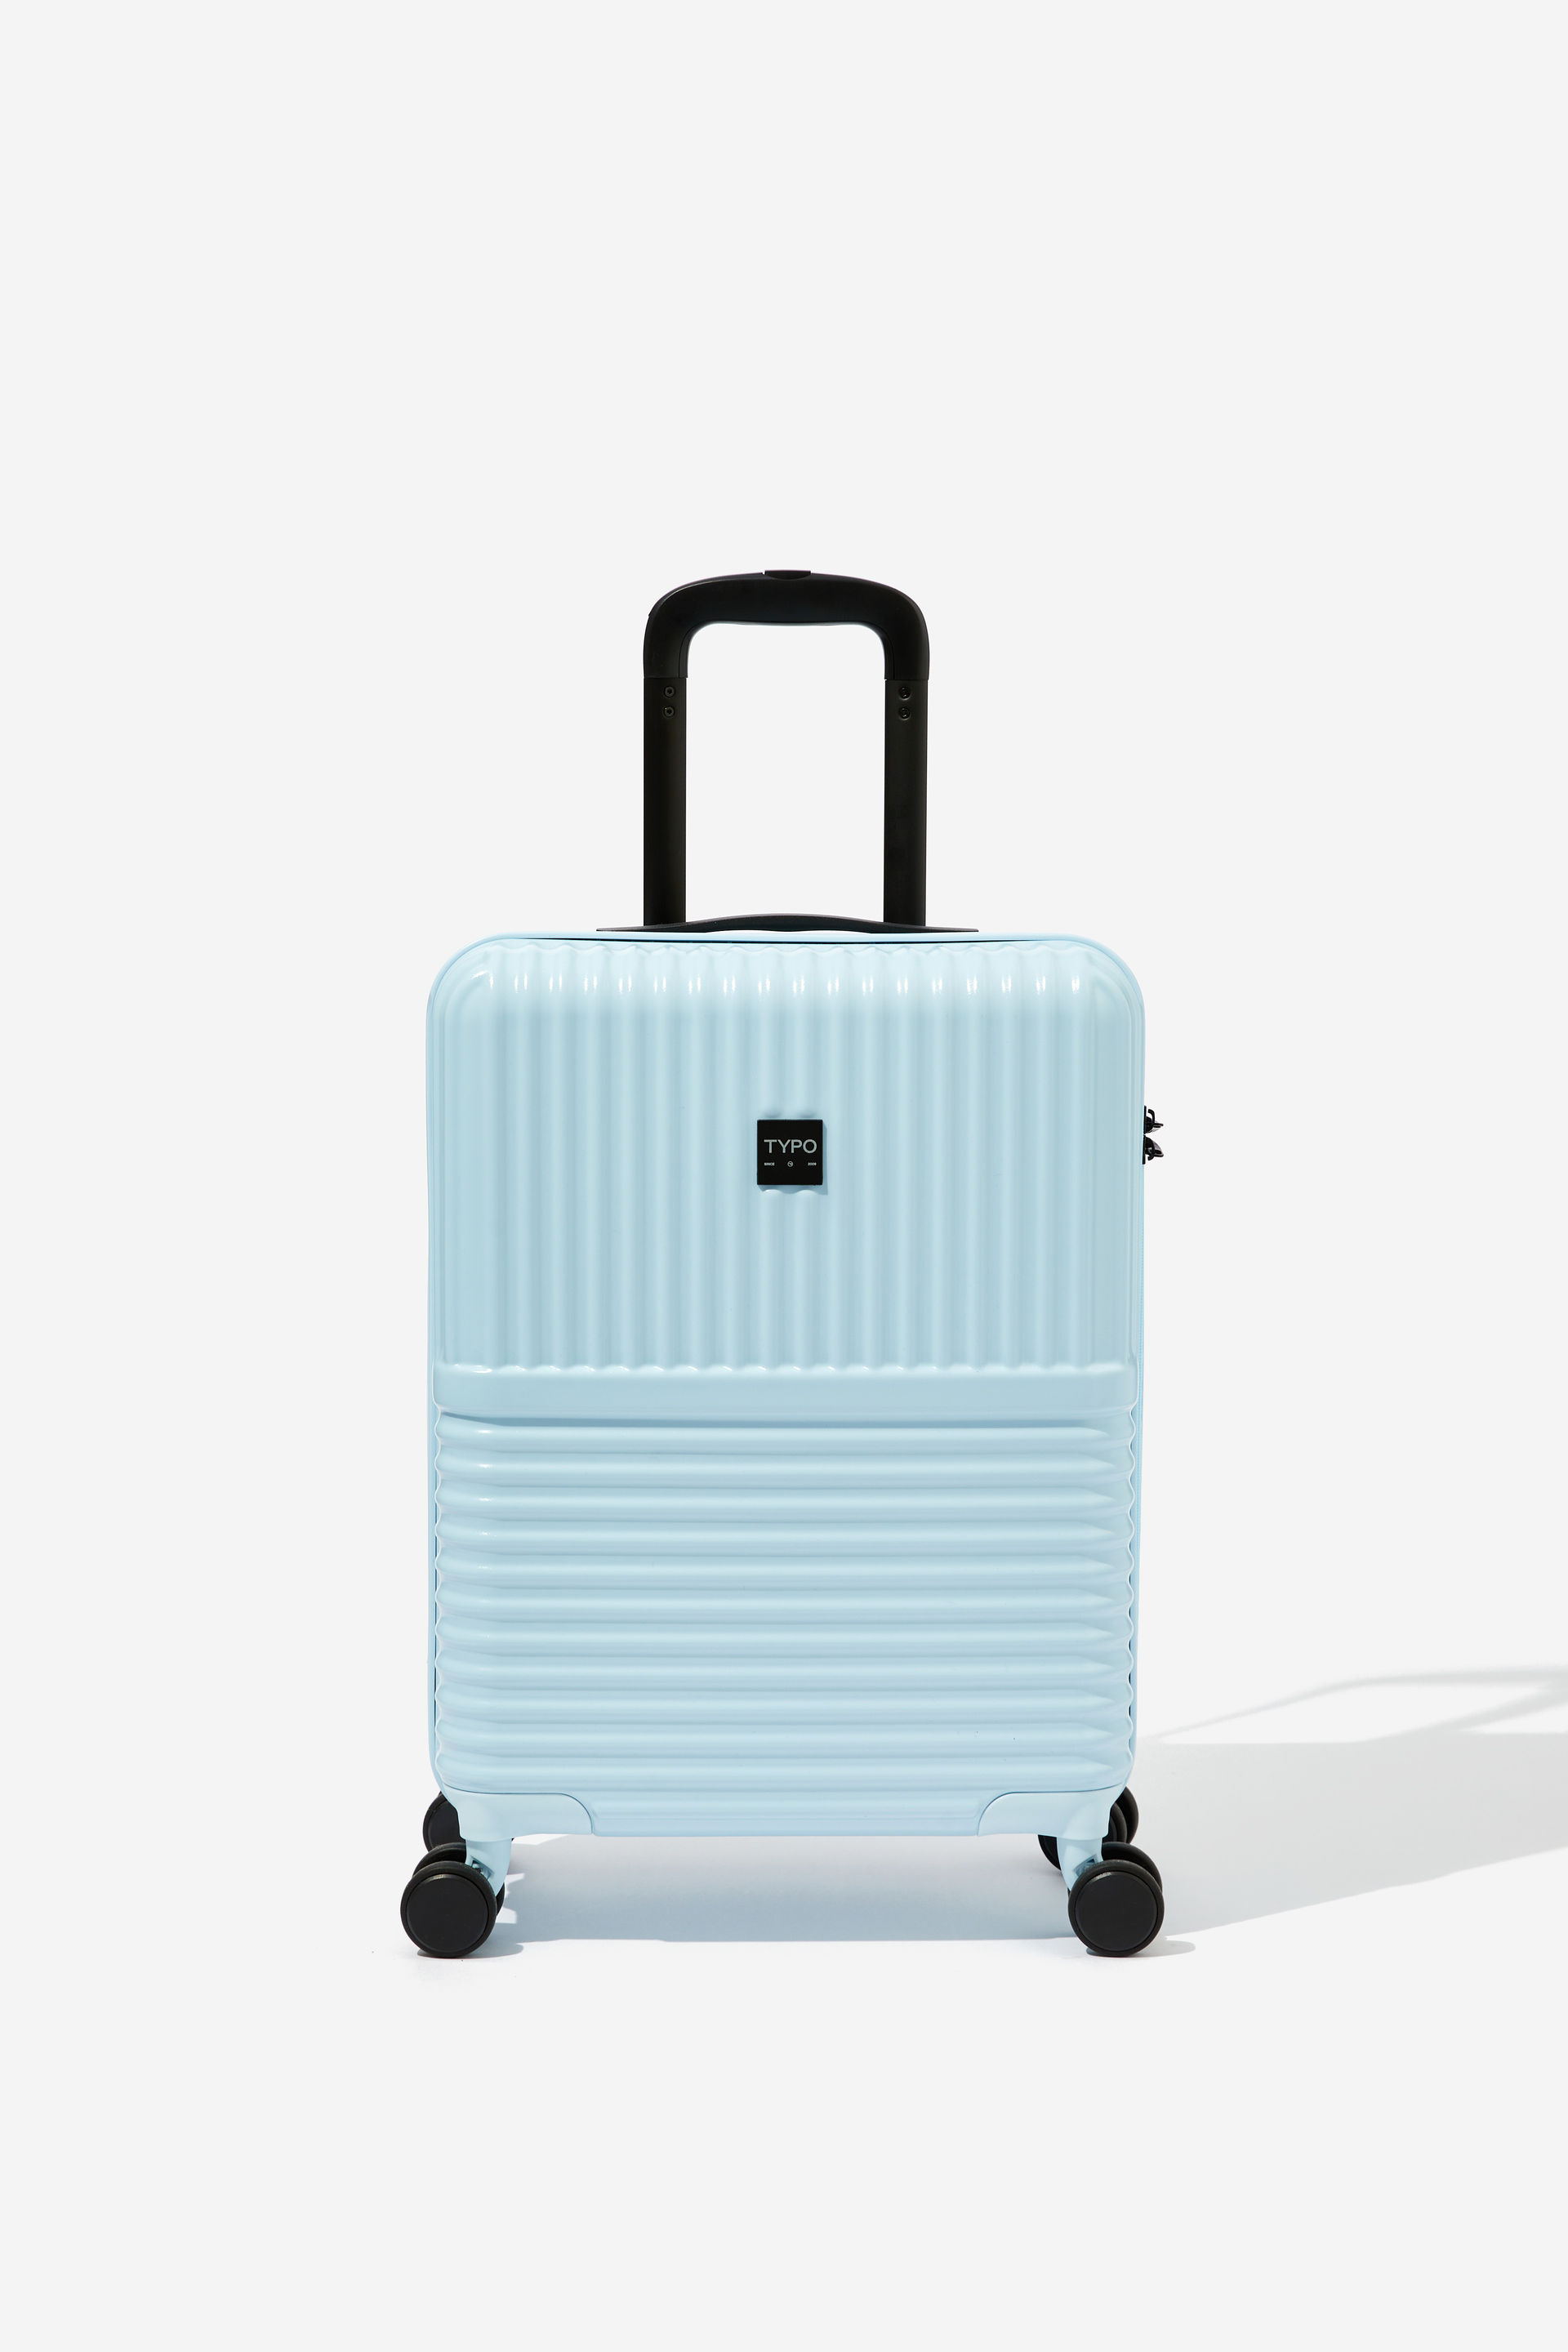 Typo - 20 Inch Carry On Suitcase - Arctic blue